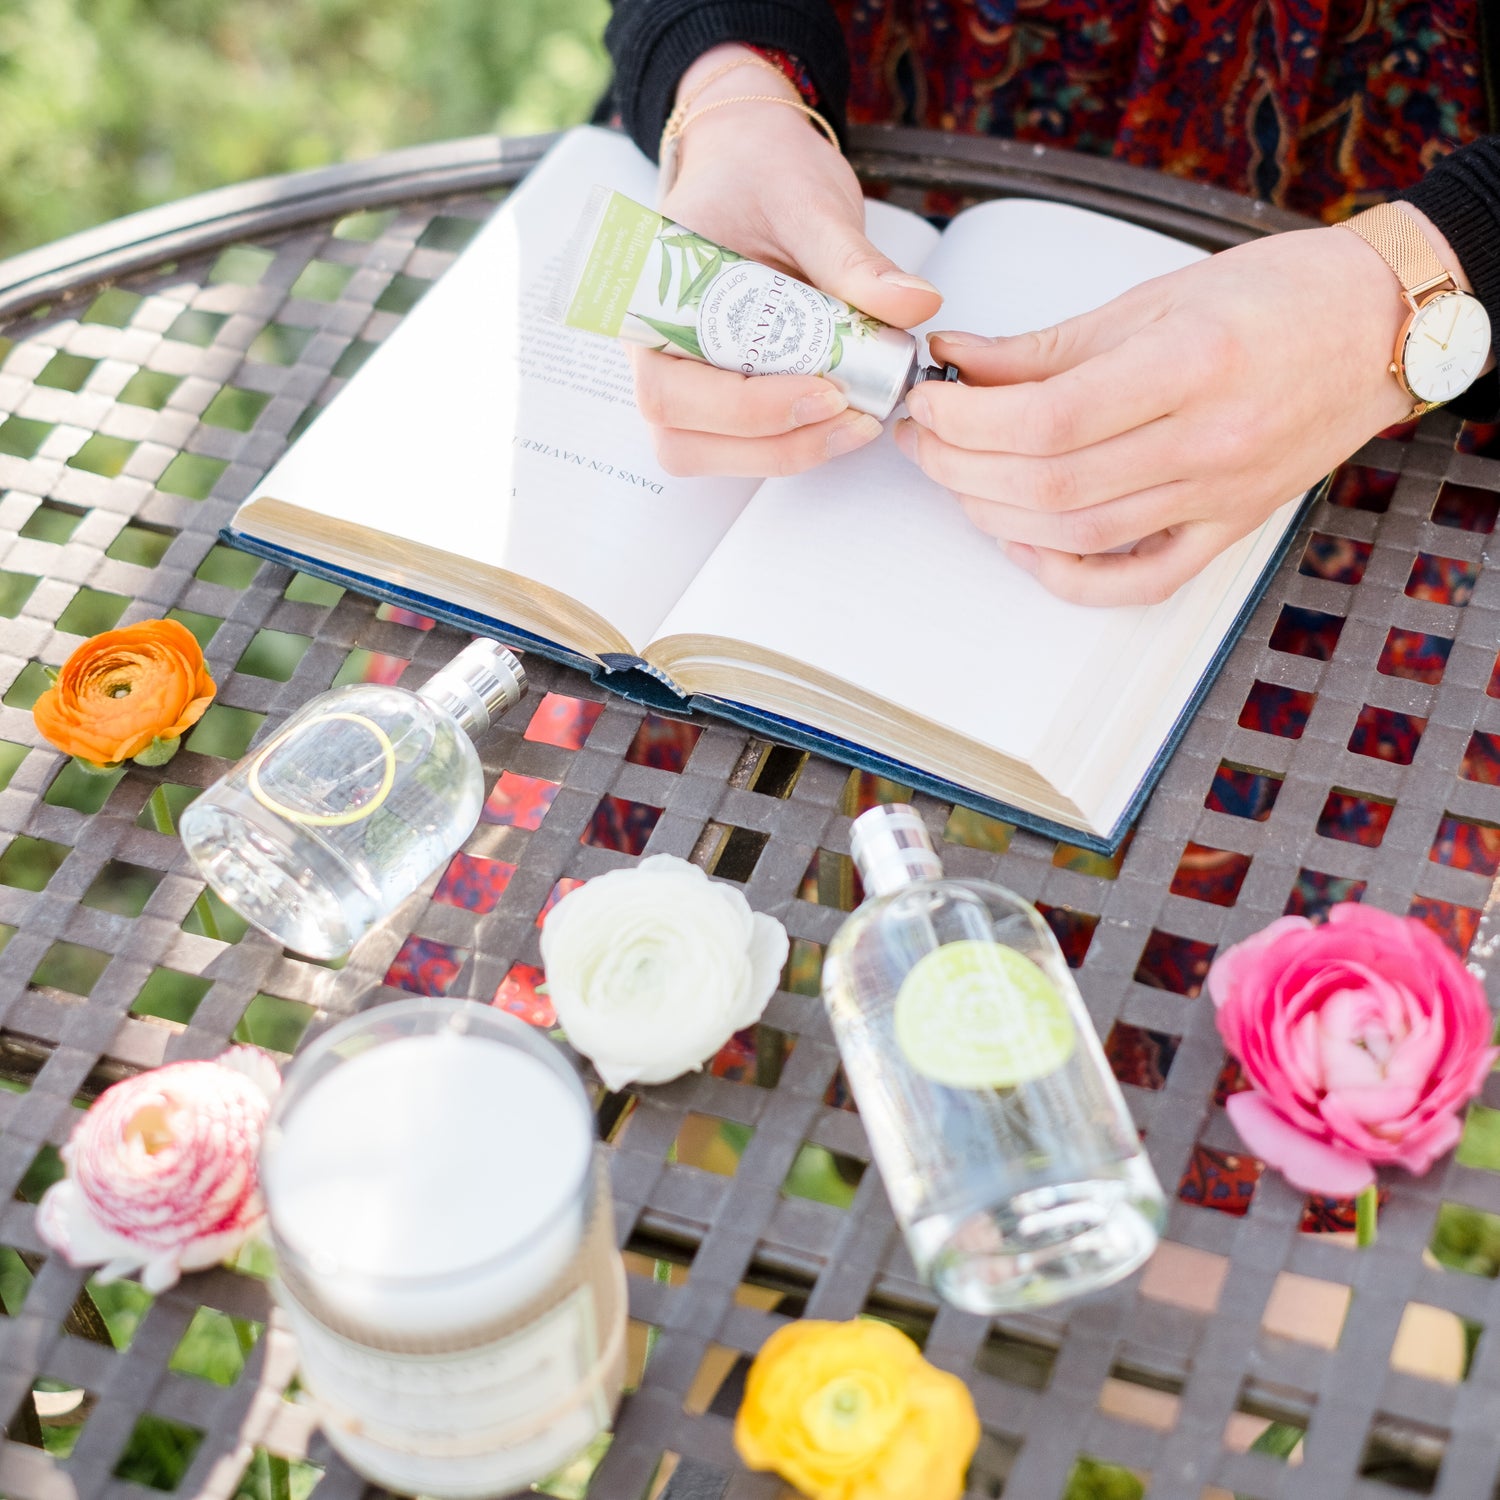 Woman with durance products putting on handcream in garden table outside with book open